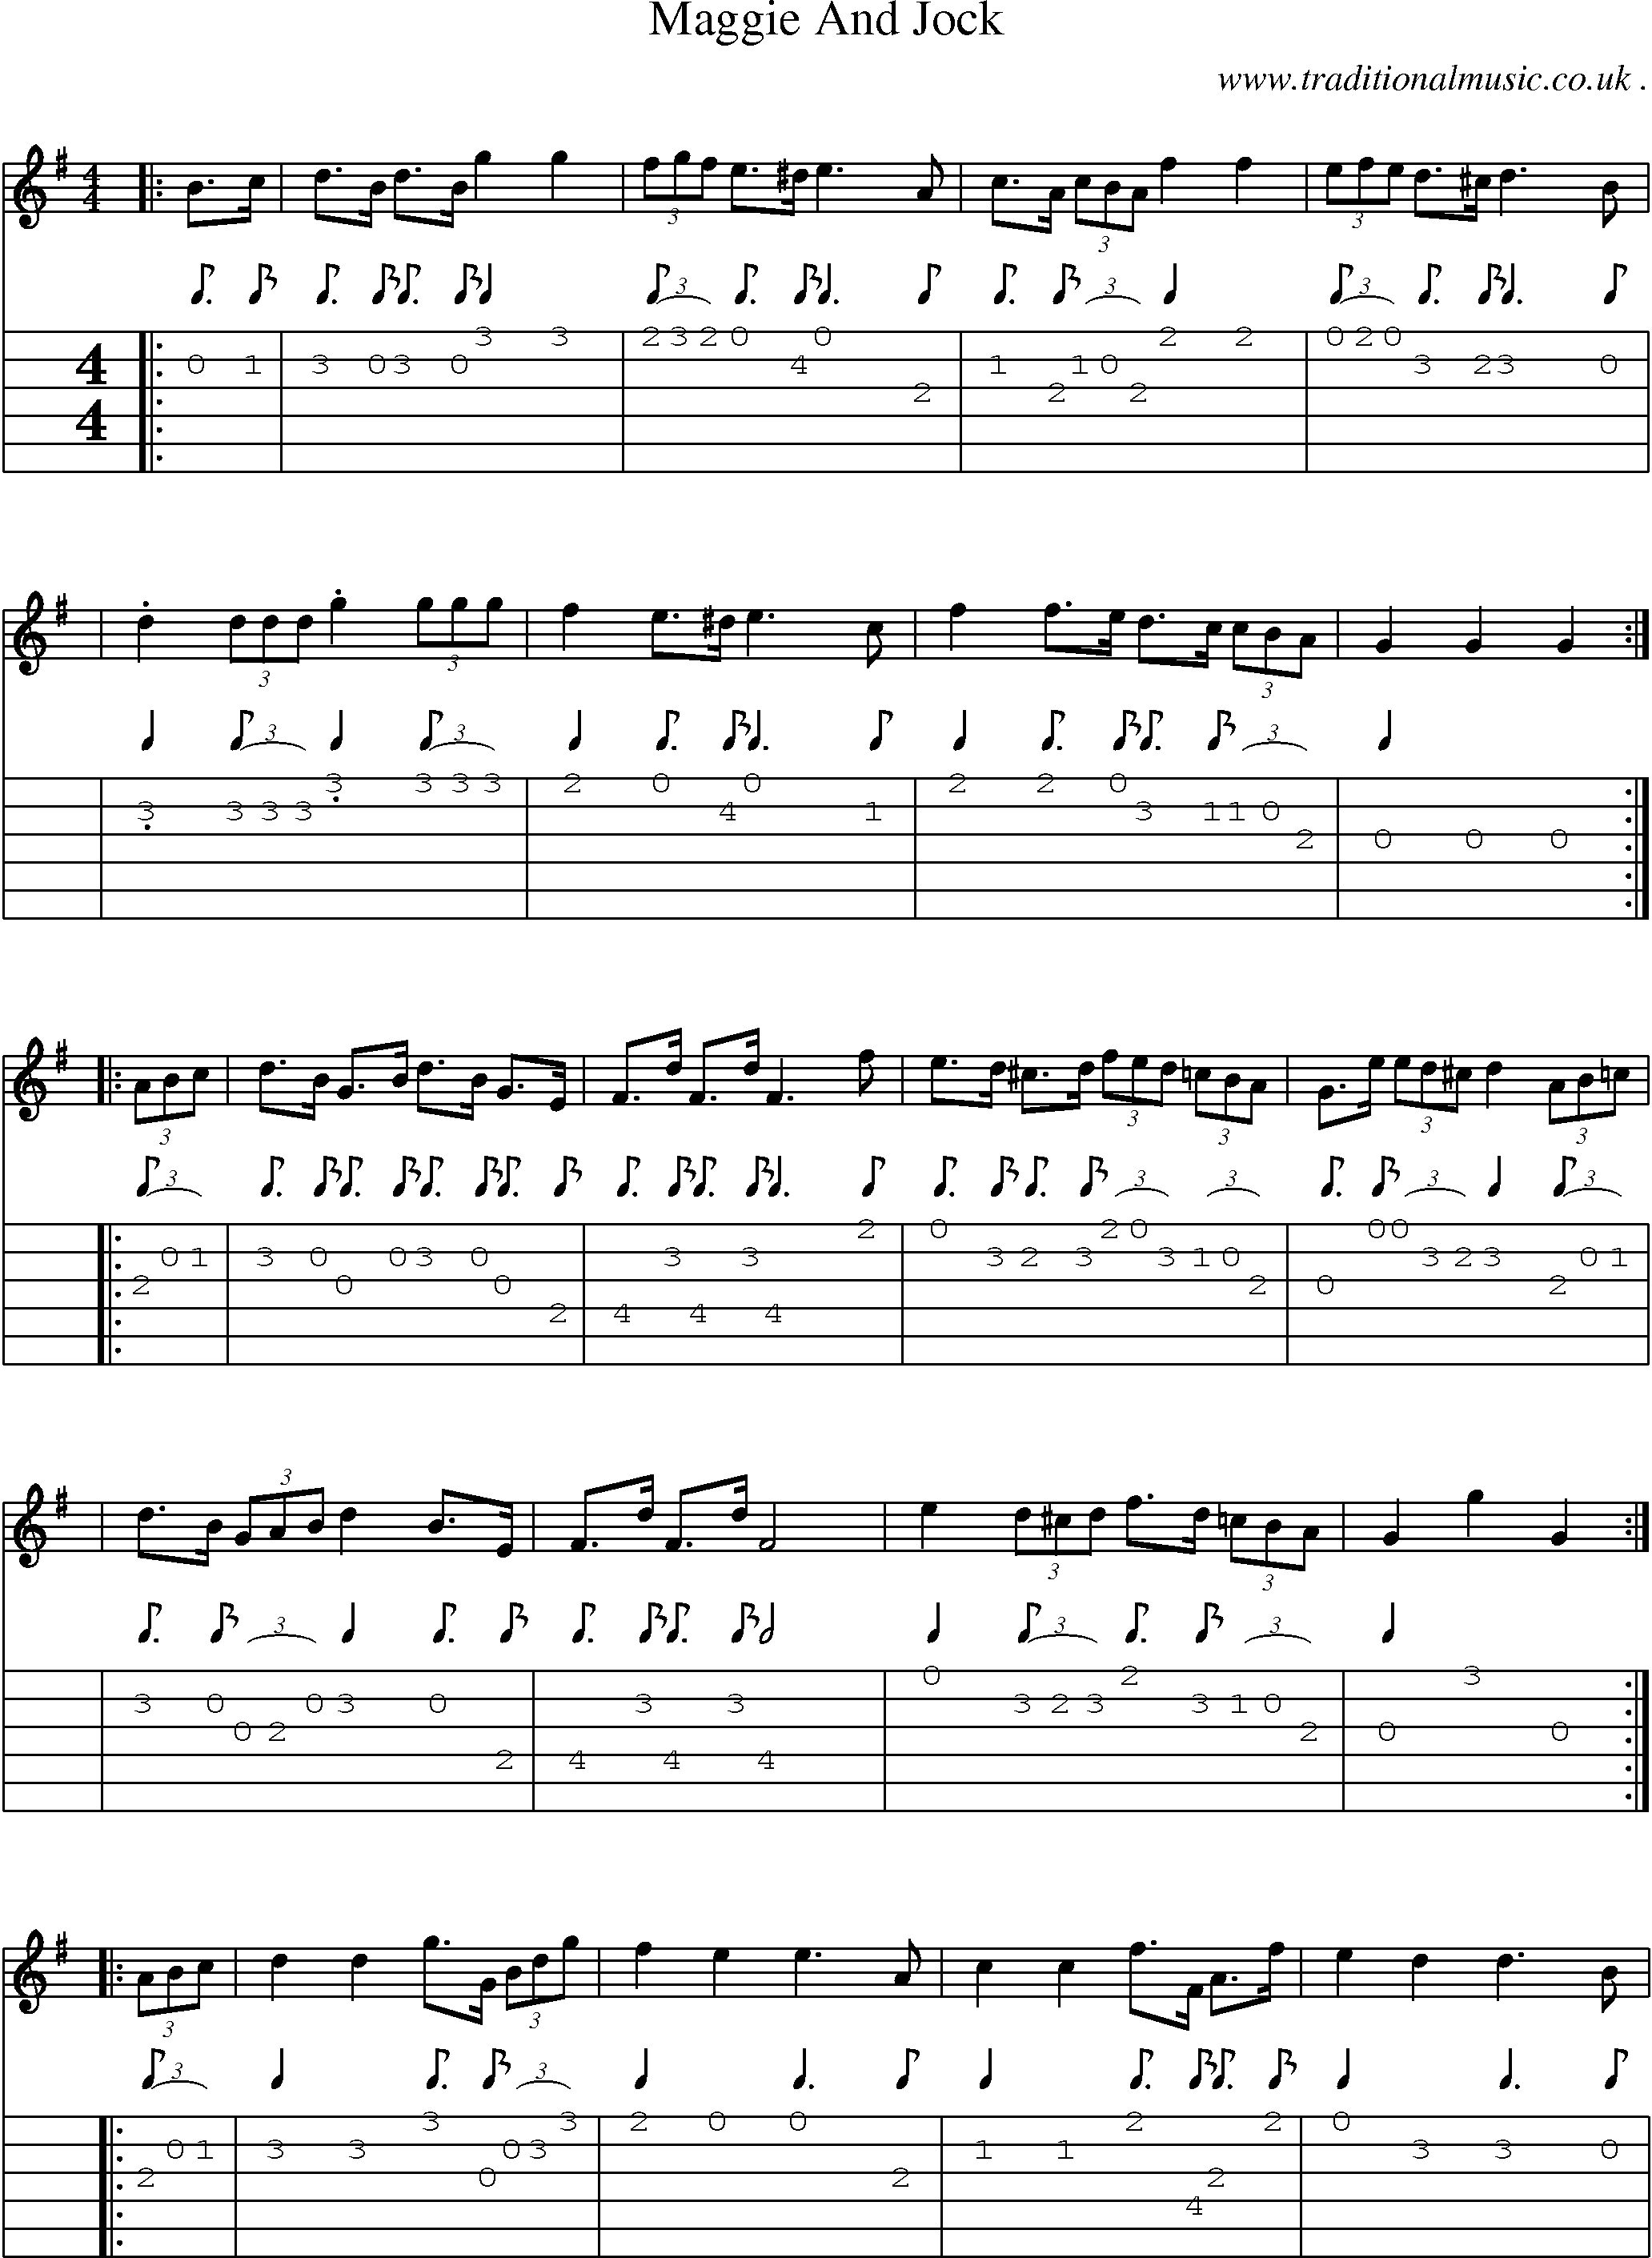 Sheet-music  score, Chords and Guitar Tabs for Maggie And Jock